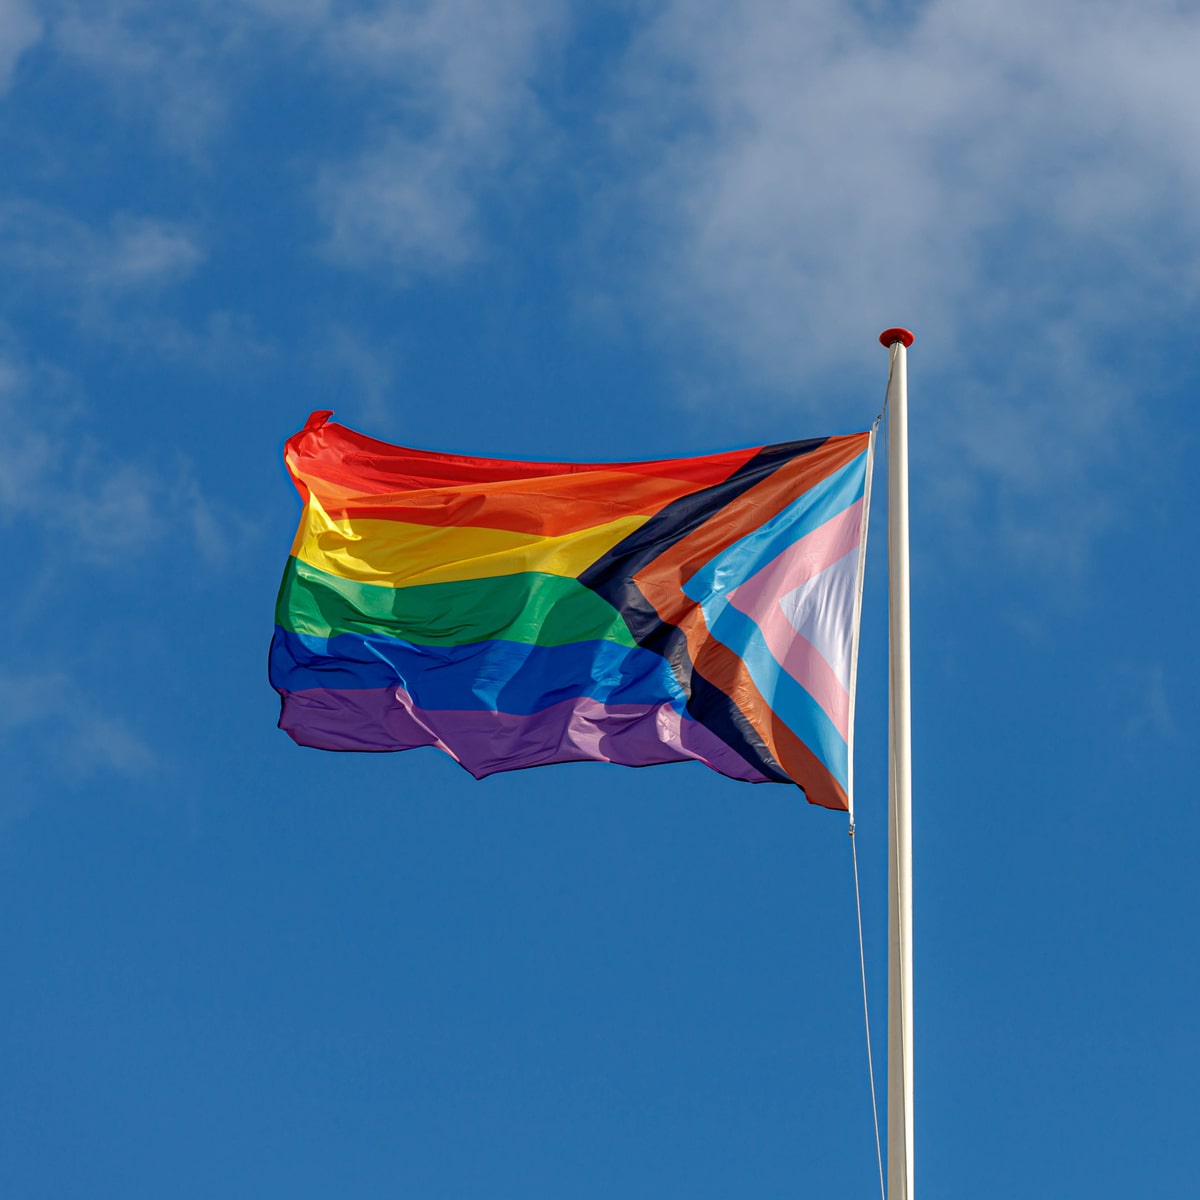 What’s the origin of the rainbow flag? 